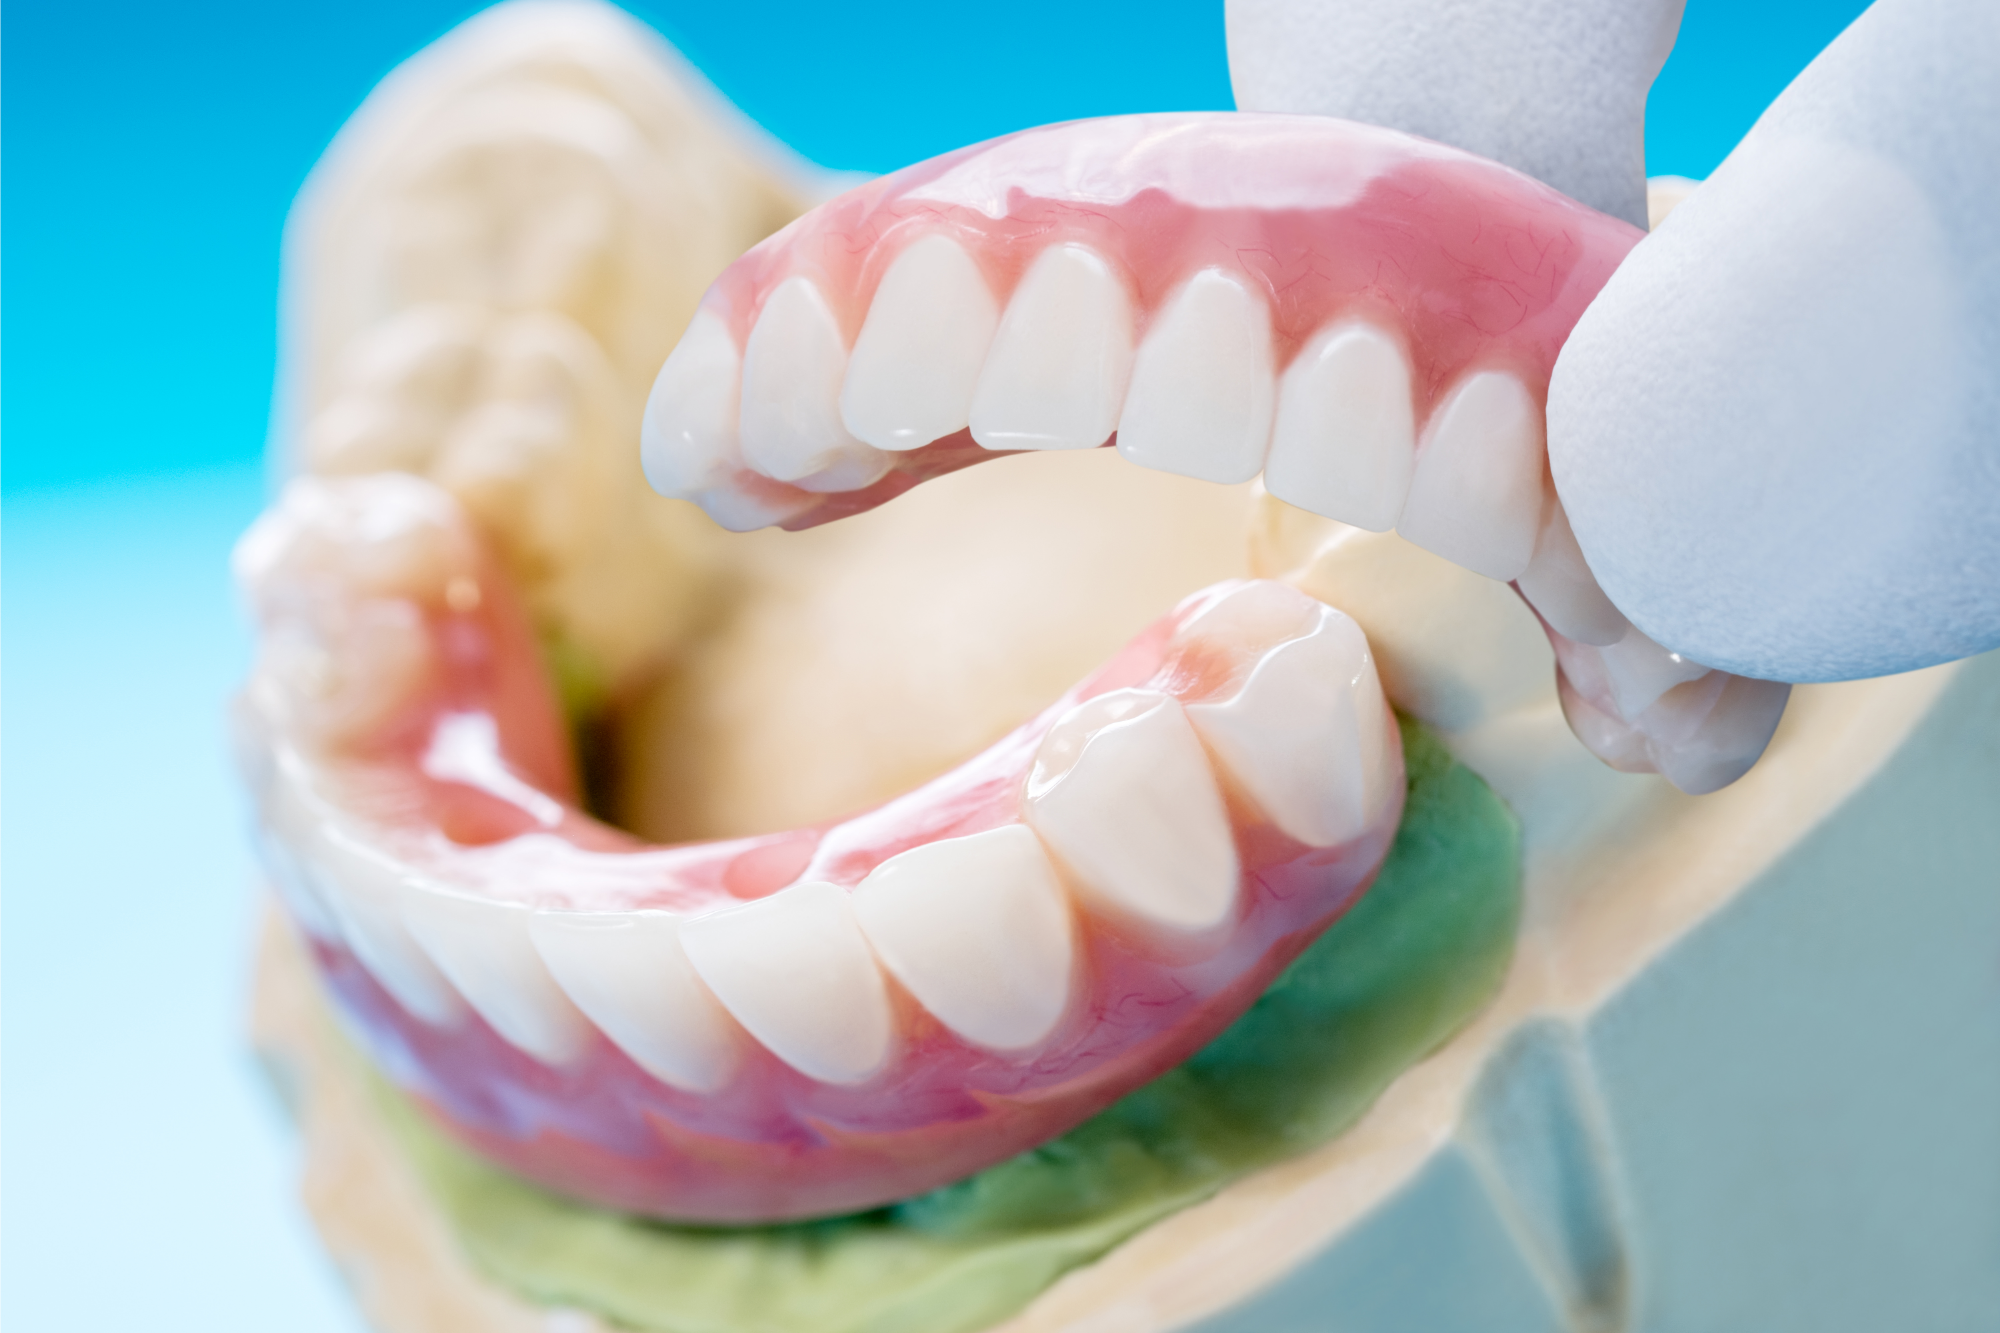 Tooth Replacement Options for Missing Teeth